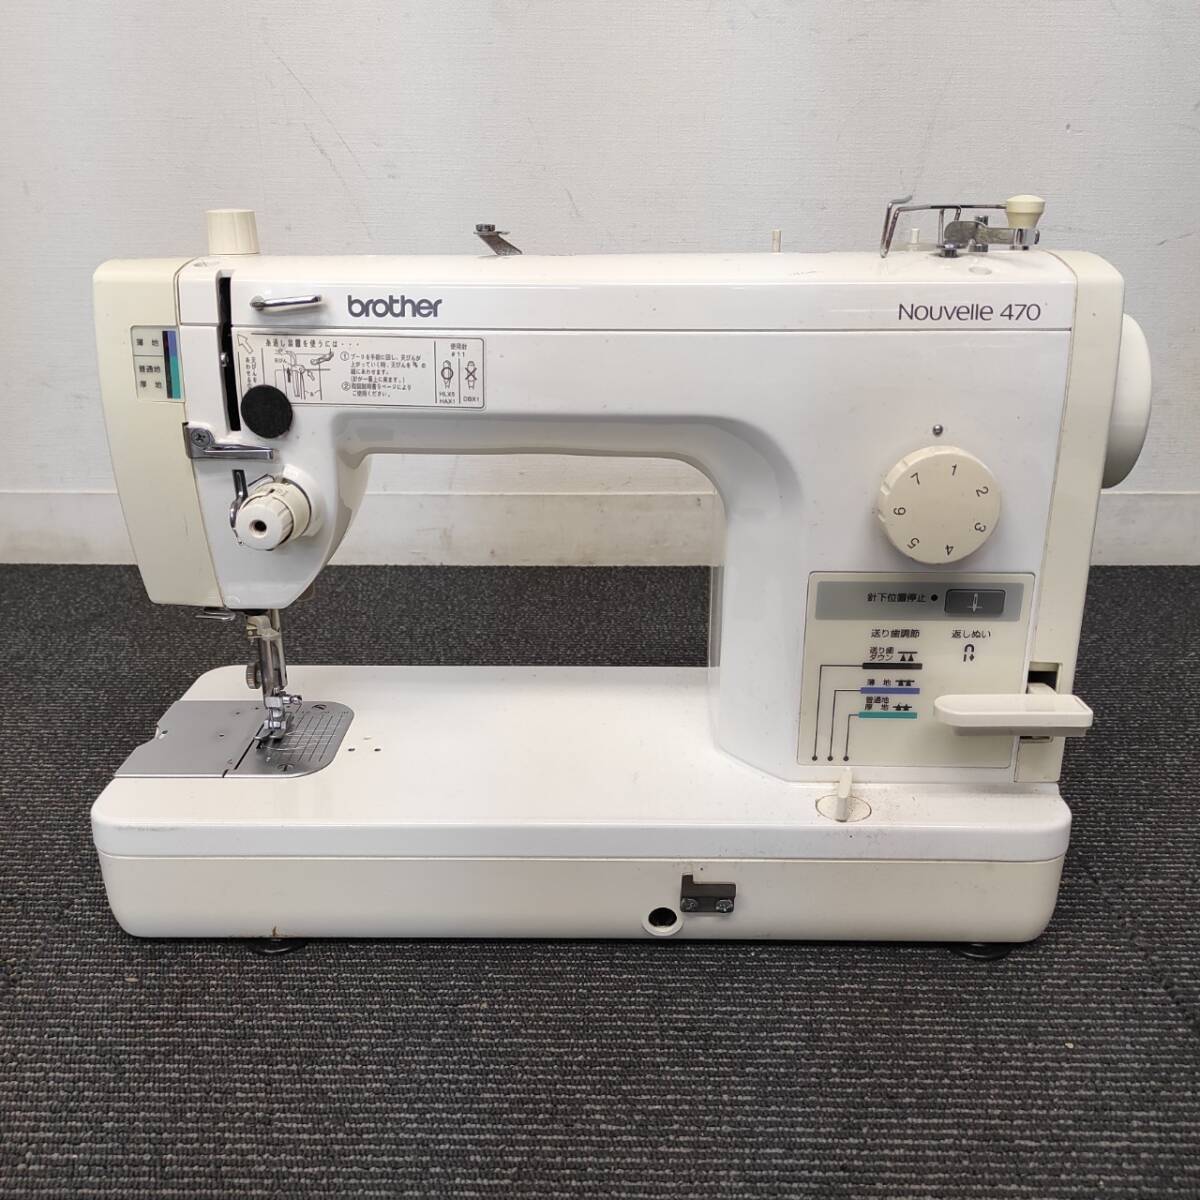 Y605-K22-6100 Brother Brother sewing machine Nouvelle 470 TA631 foot controller /. pcs / soft case attaching 